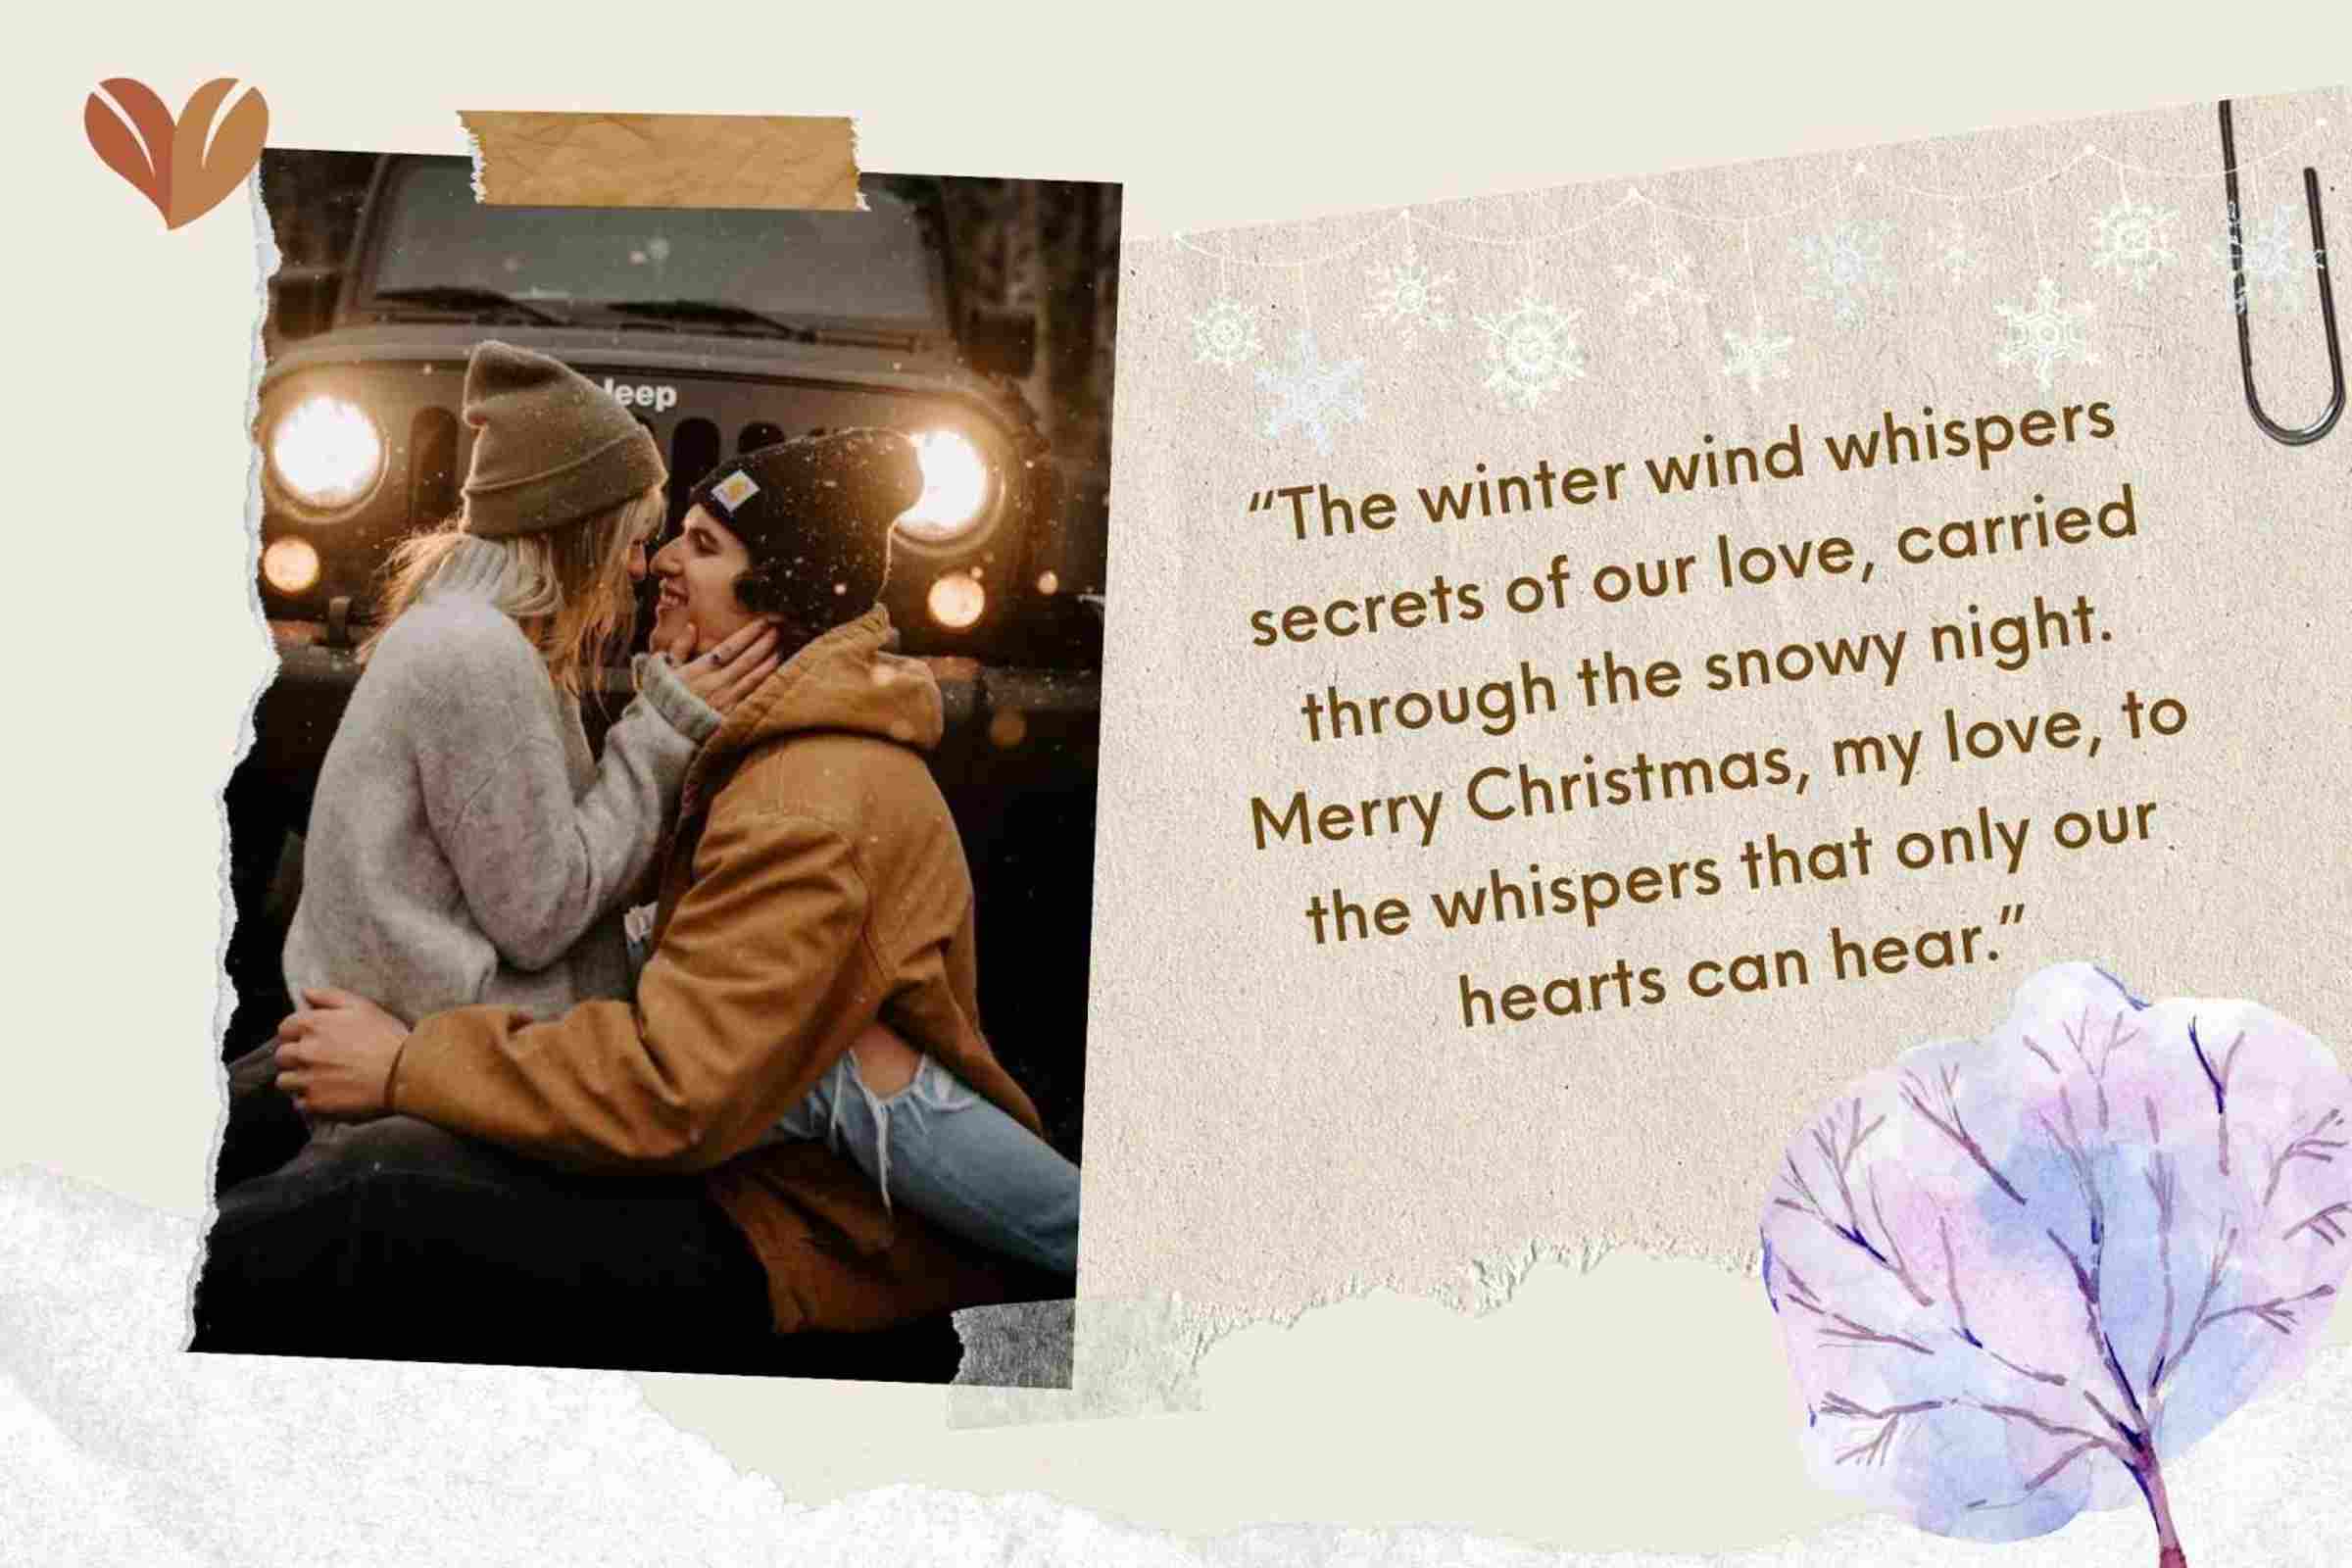 “The winter wind whispers secrets of our love, carried through the snowy night. Merry Christmas, my love, to the whispers that only our hearts can hear.”